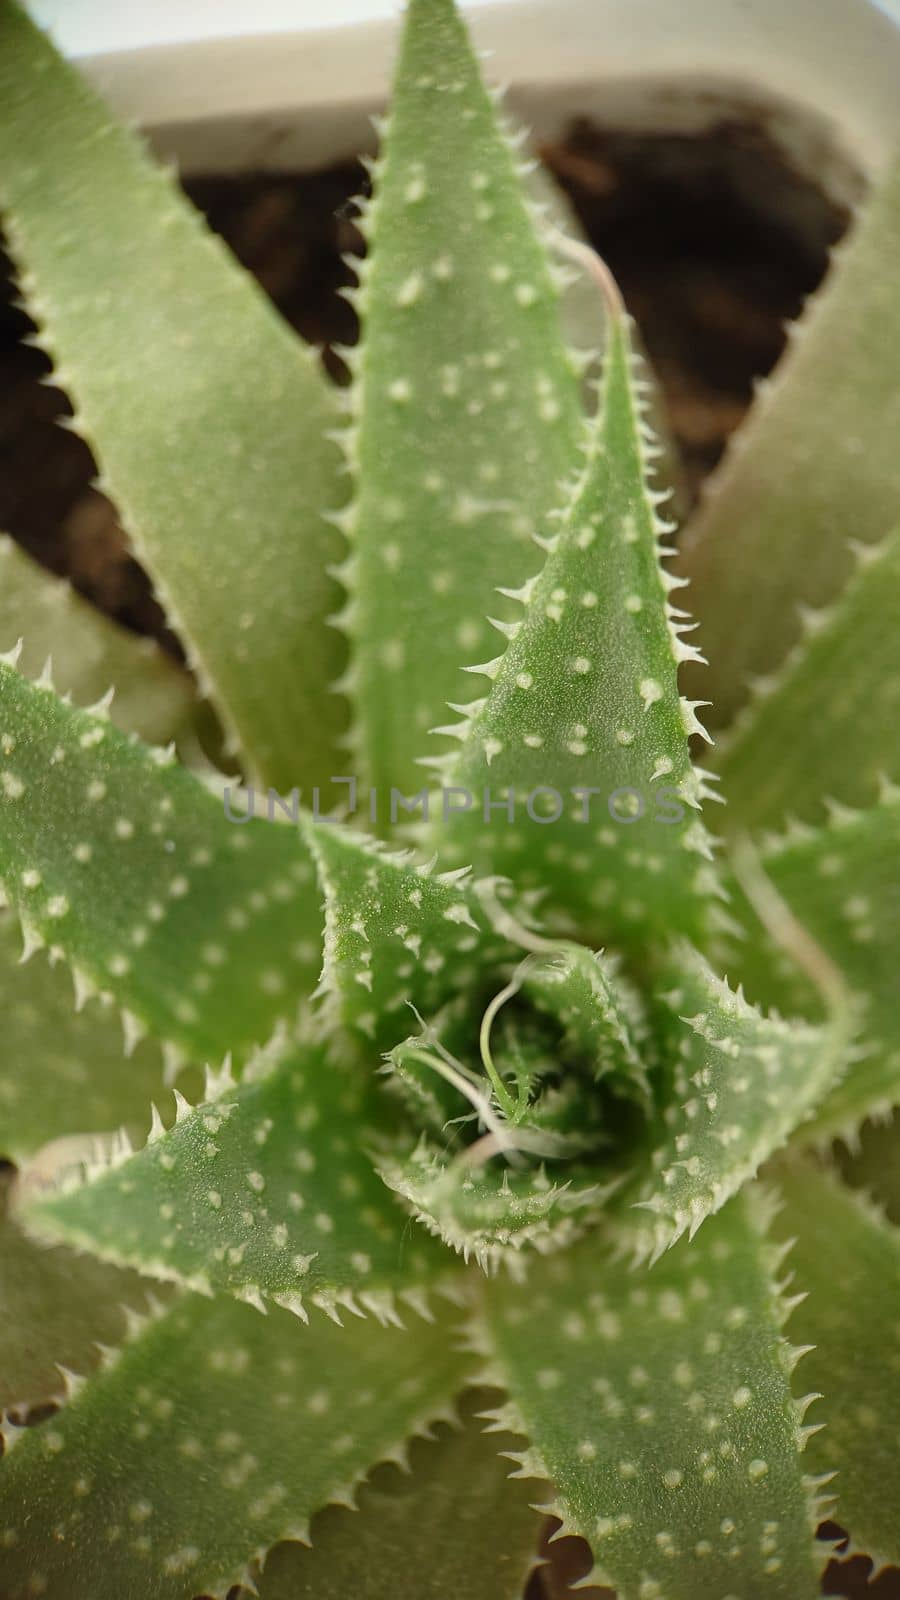 Background image of an aloe plant close-up in a pot by Mastak80